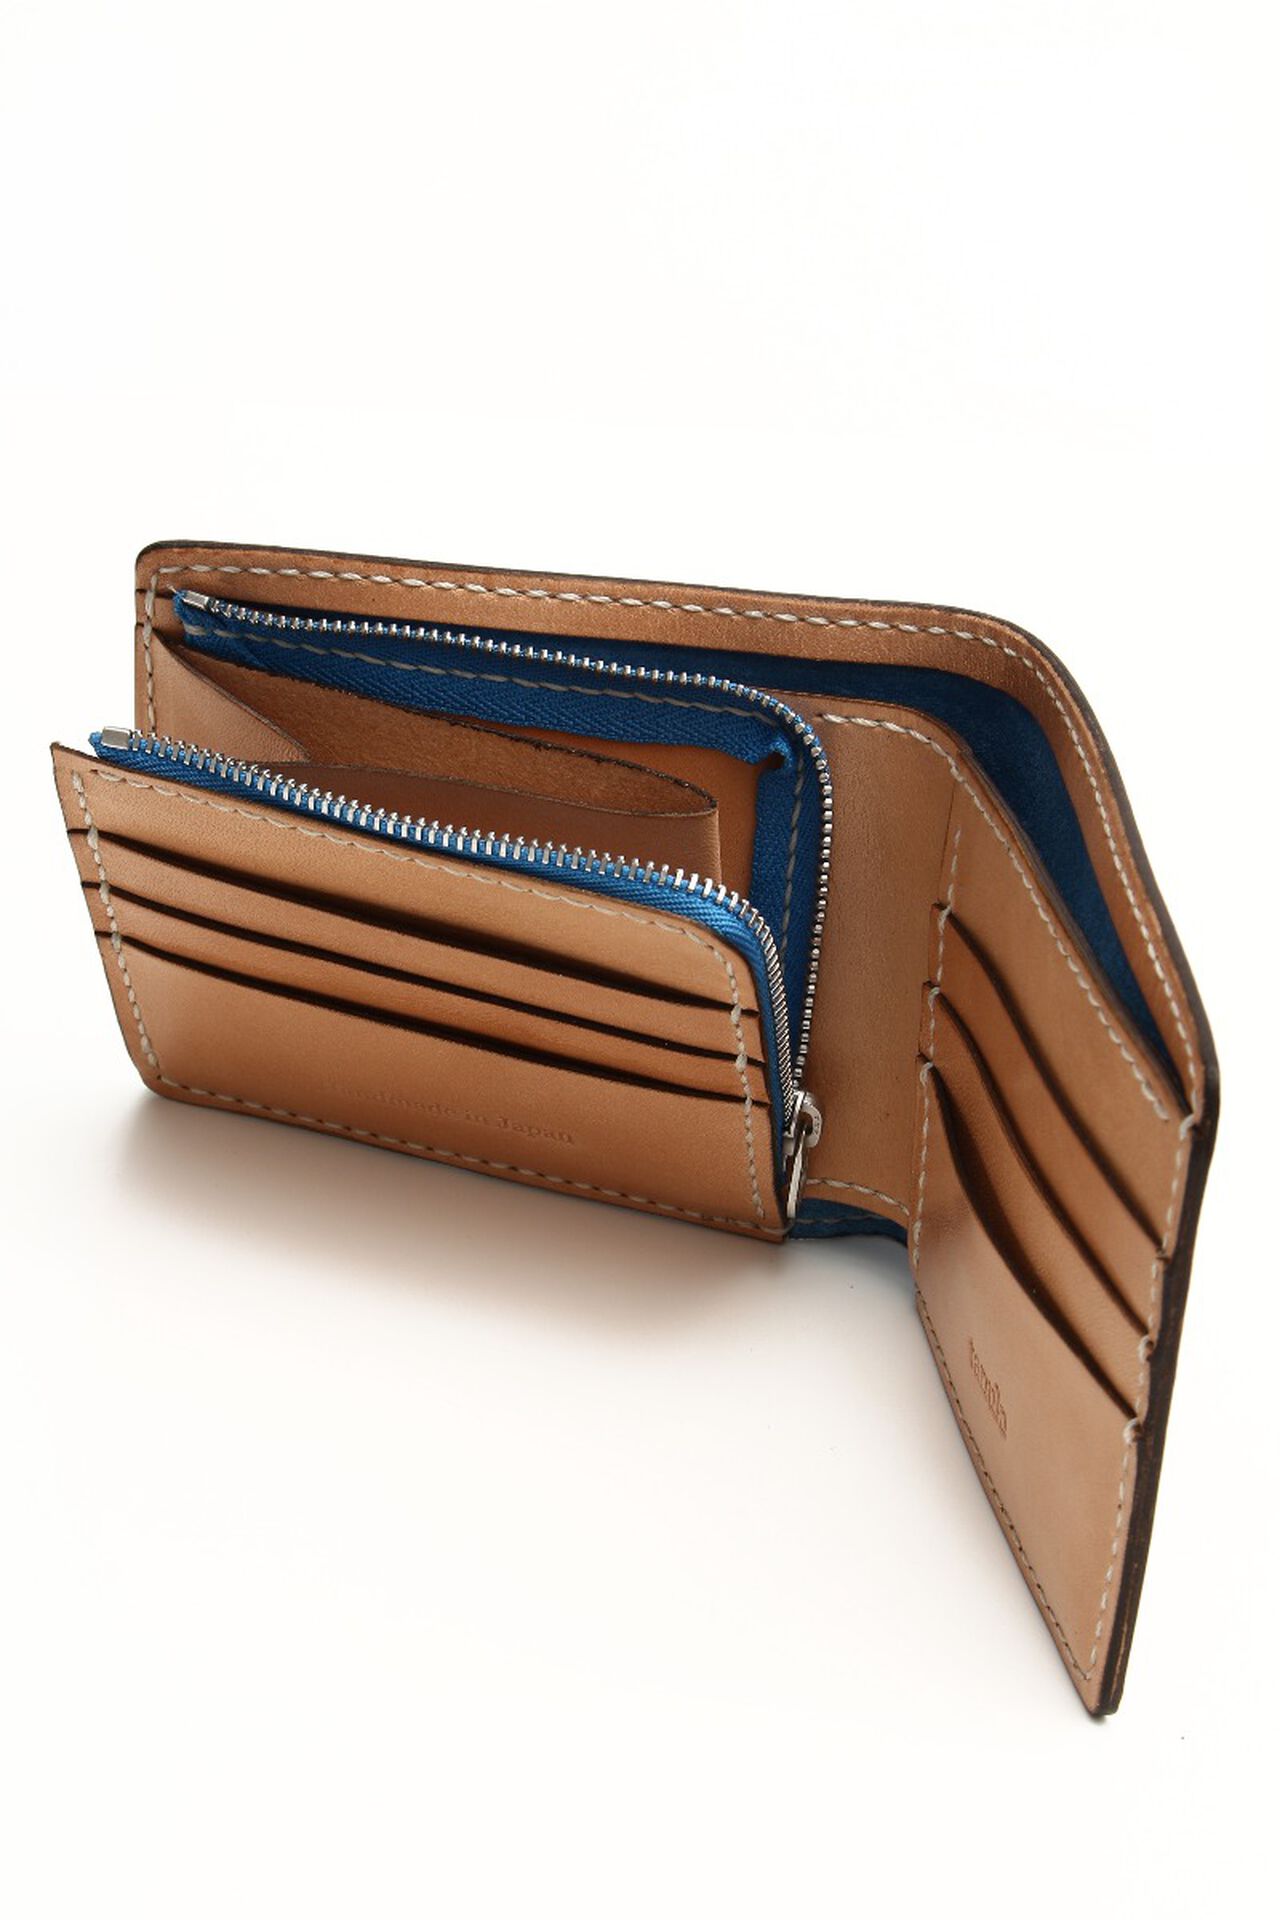 Short Wallet with Coin Pocket (Cordovan) (NATURAL),, large image number 4